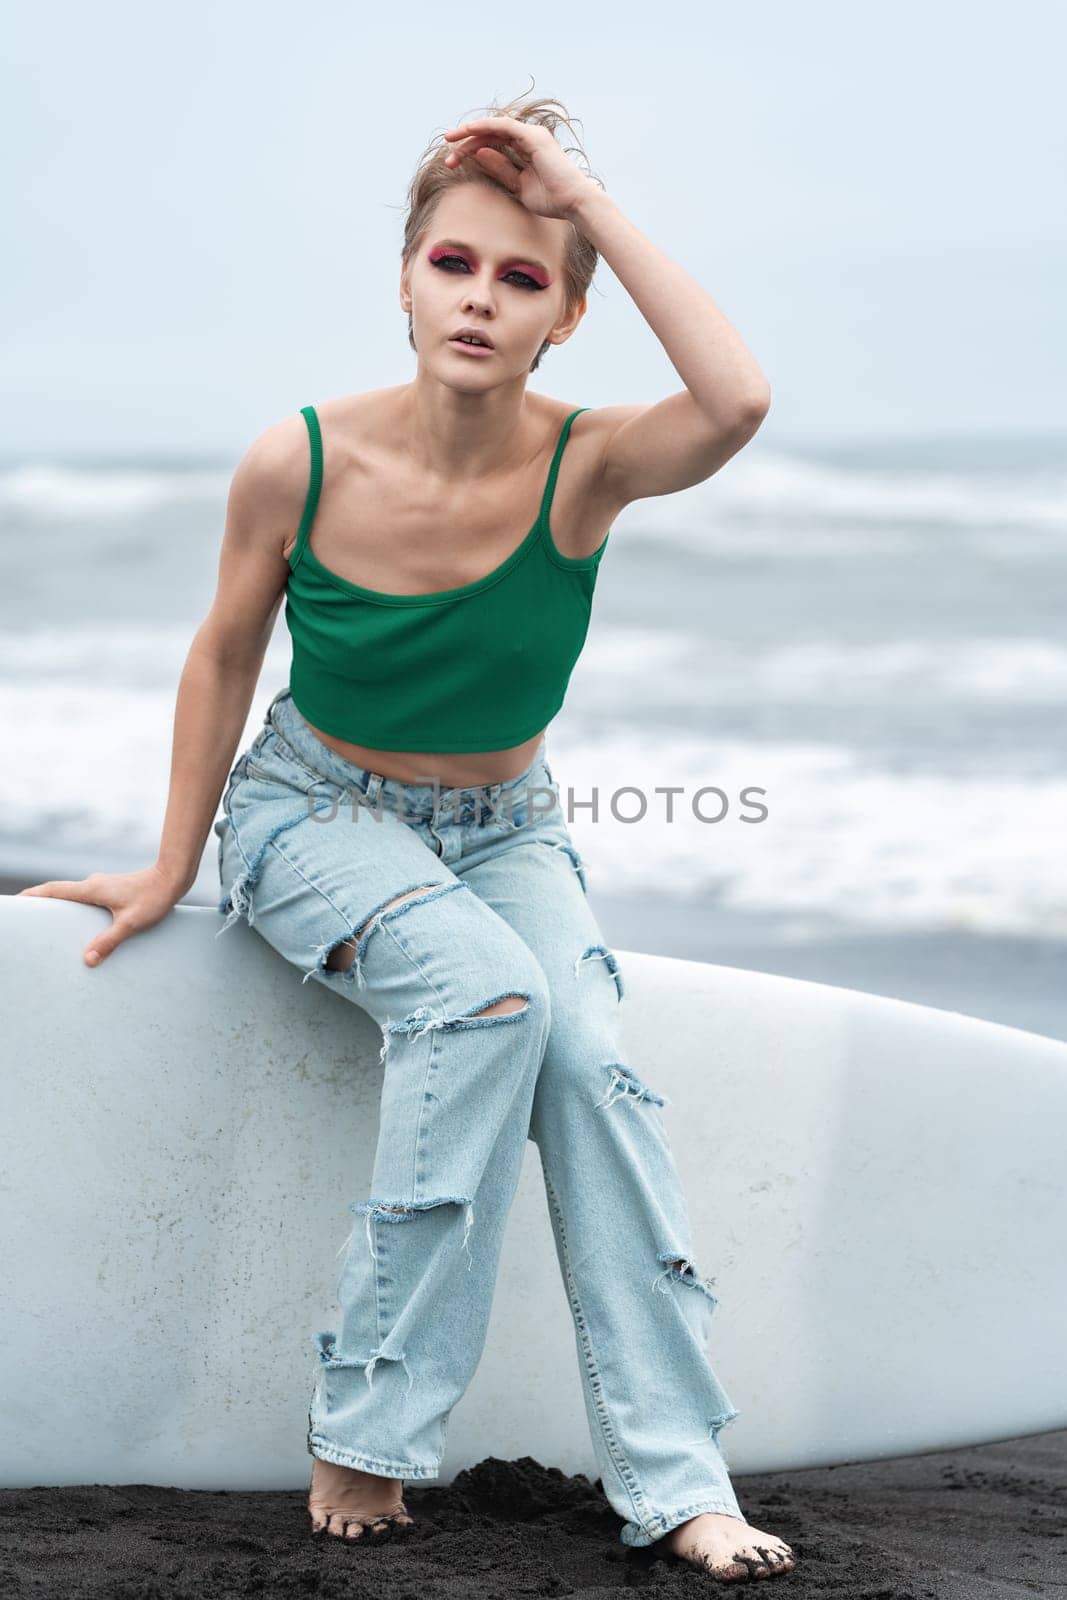 Woman wearing top and blue jeans sitting on surf board lying on sand, on background of sea waves by Alexander-Piragis